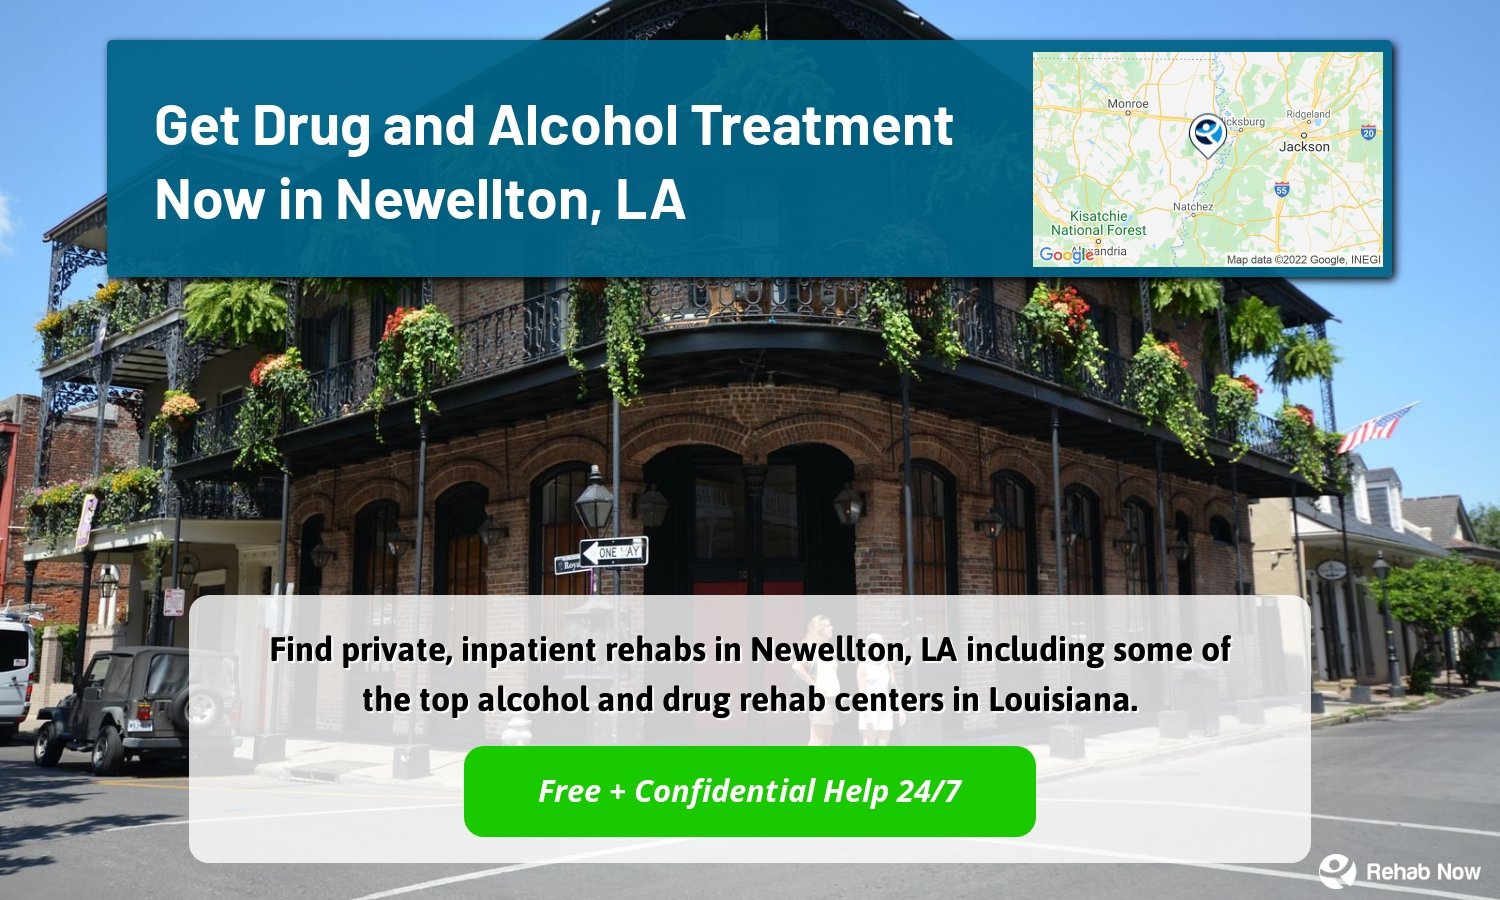 Find private, inpatient rehabs in Newellton, LA including some of the top alcohol and drug rehab centers in Louisiana.